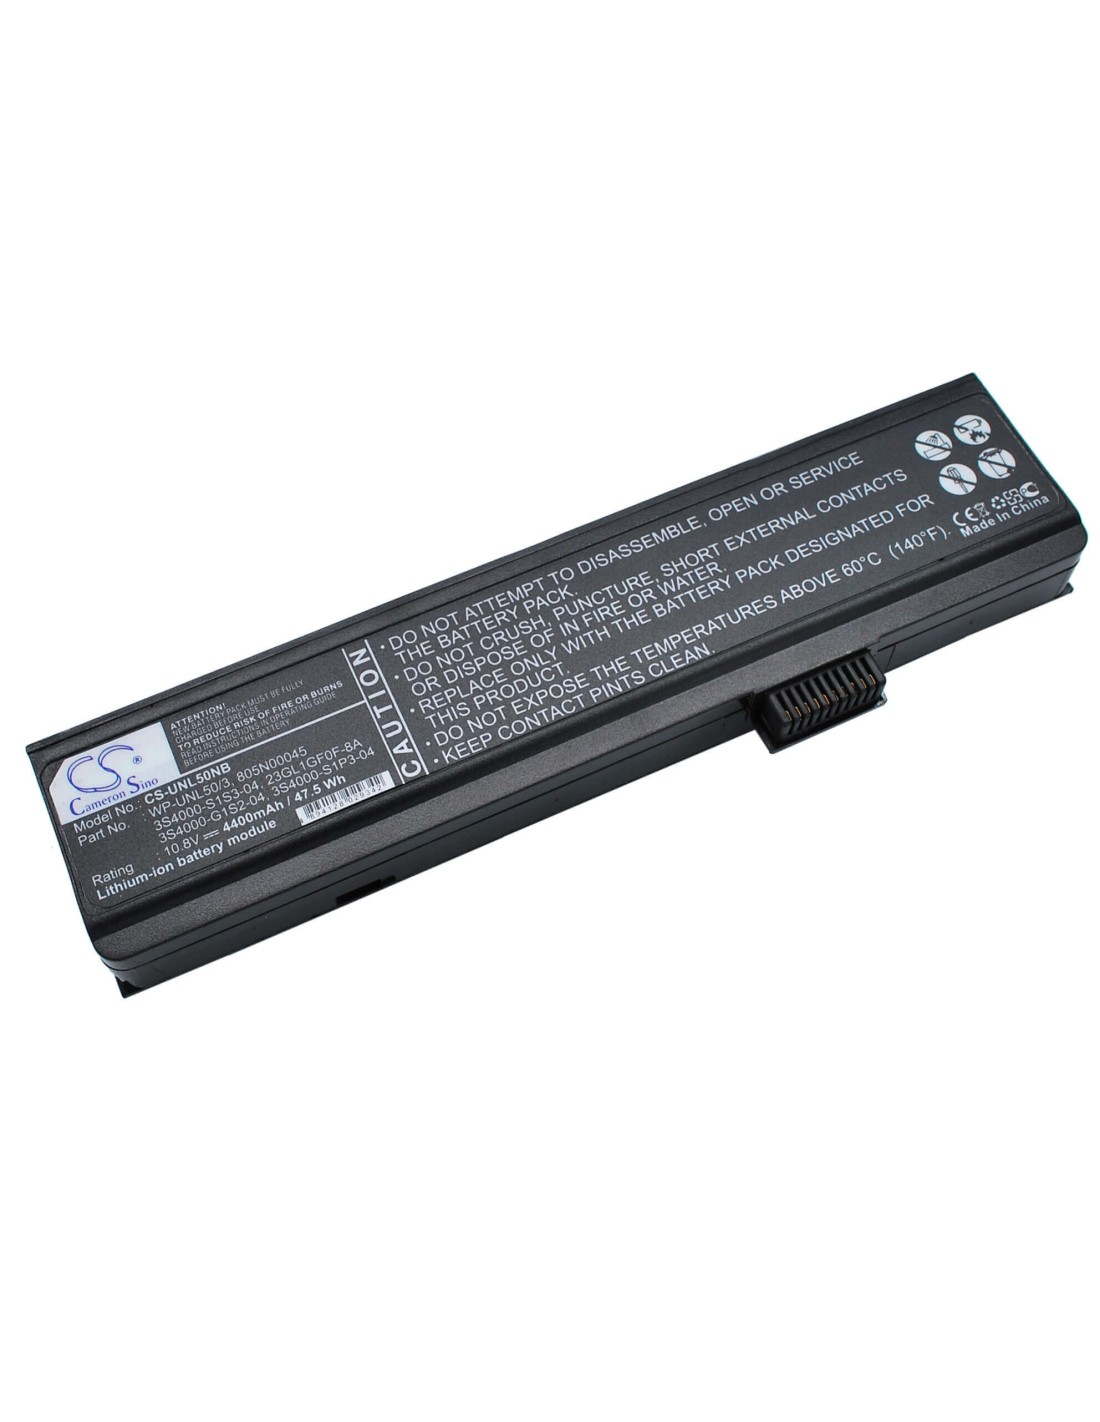 Black Battery for Advent 7109b, 8117, 7109a 10.8V, 4400mAh - 47.52Wh